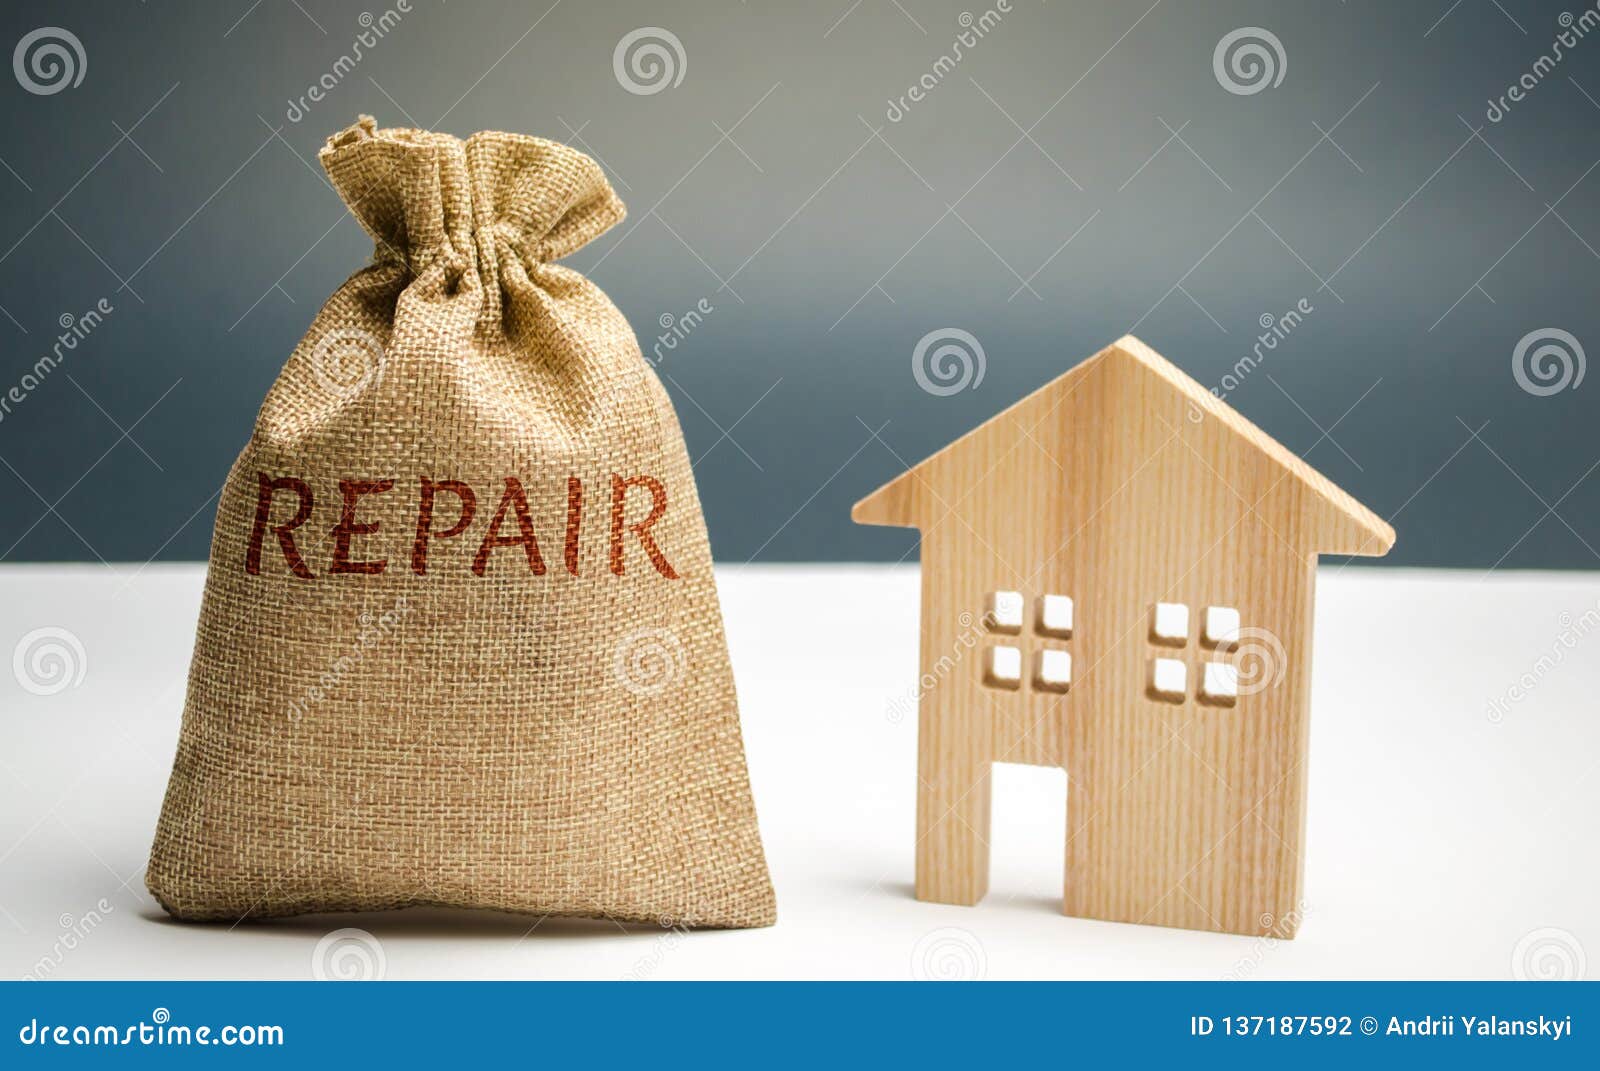 Bag Repair Images – Browse 20,746 Stock Photos, Vectors, and Video